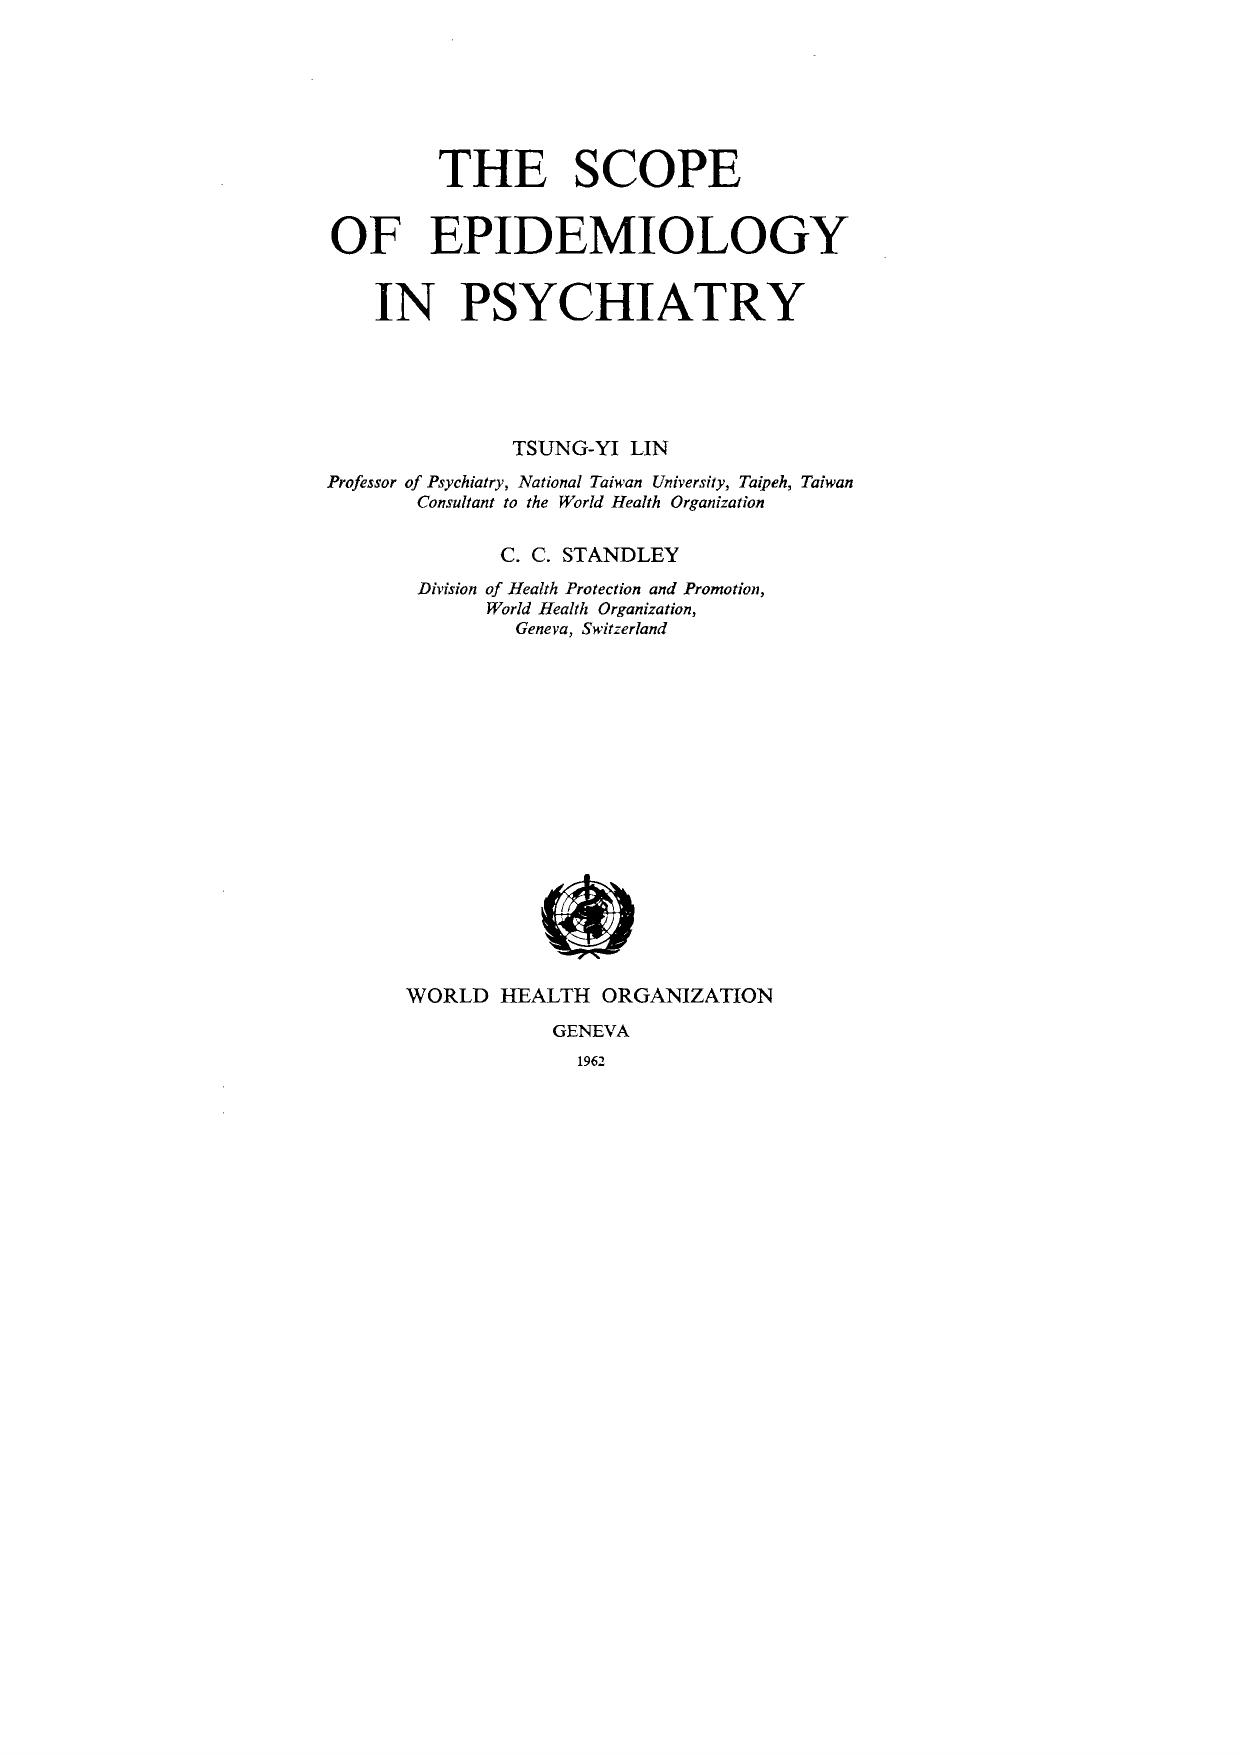 The Scope of Epidemiology in Psychiatry WHO PHP 1962